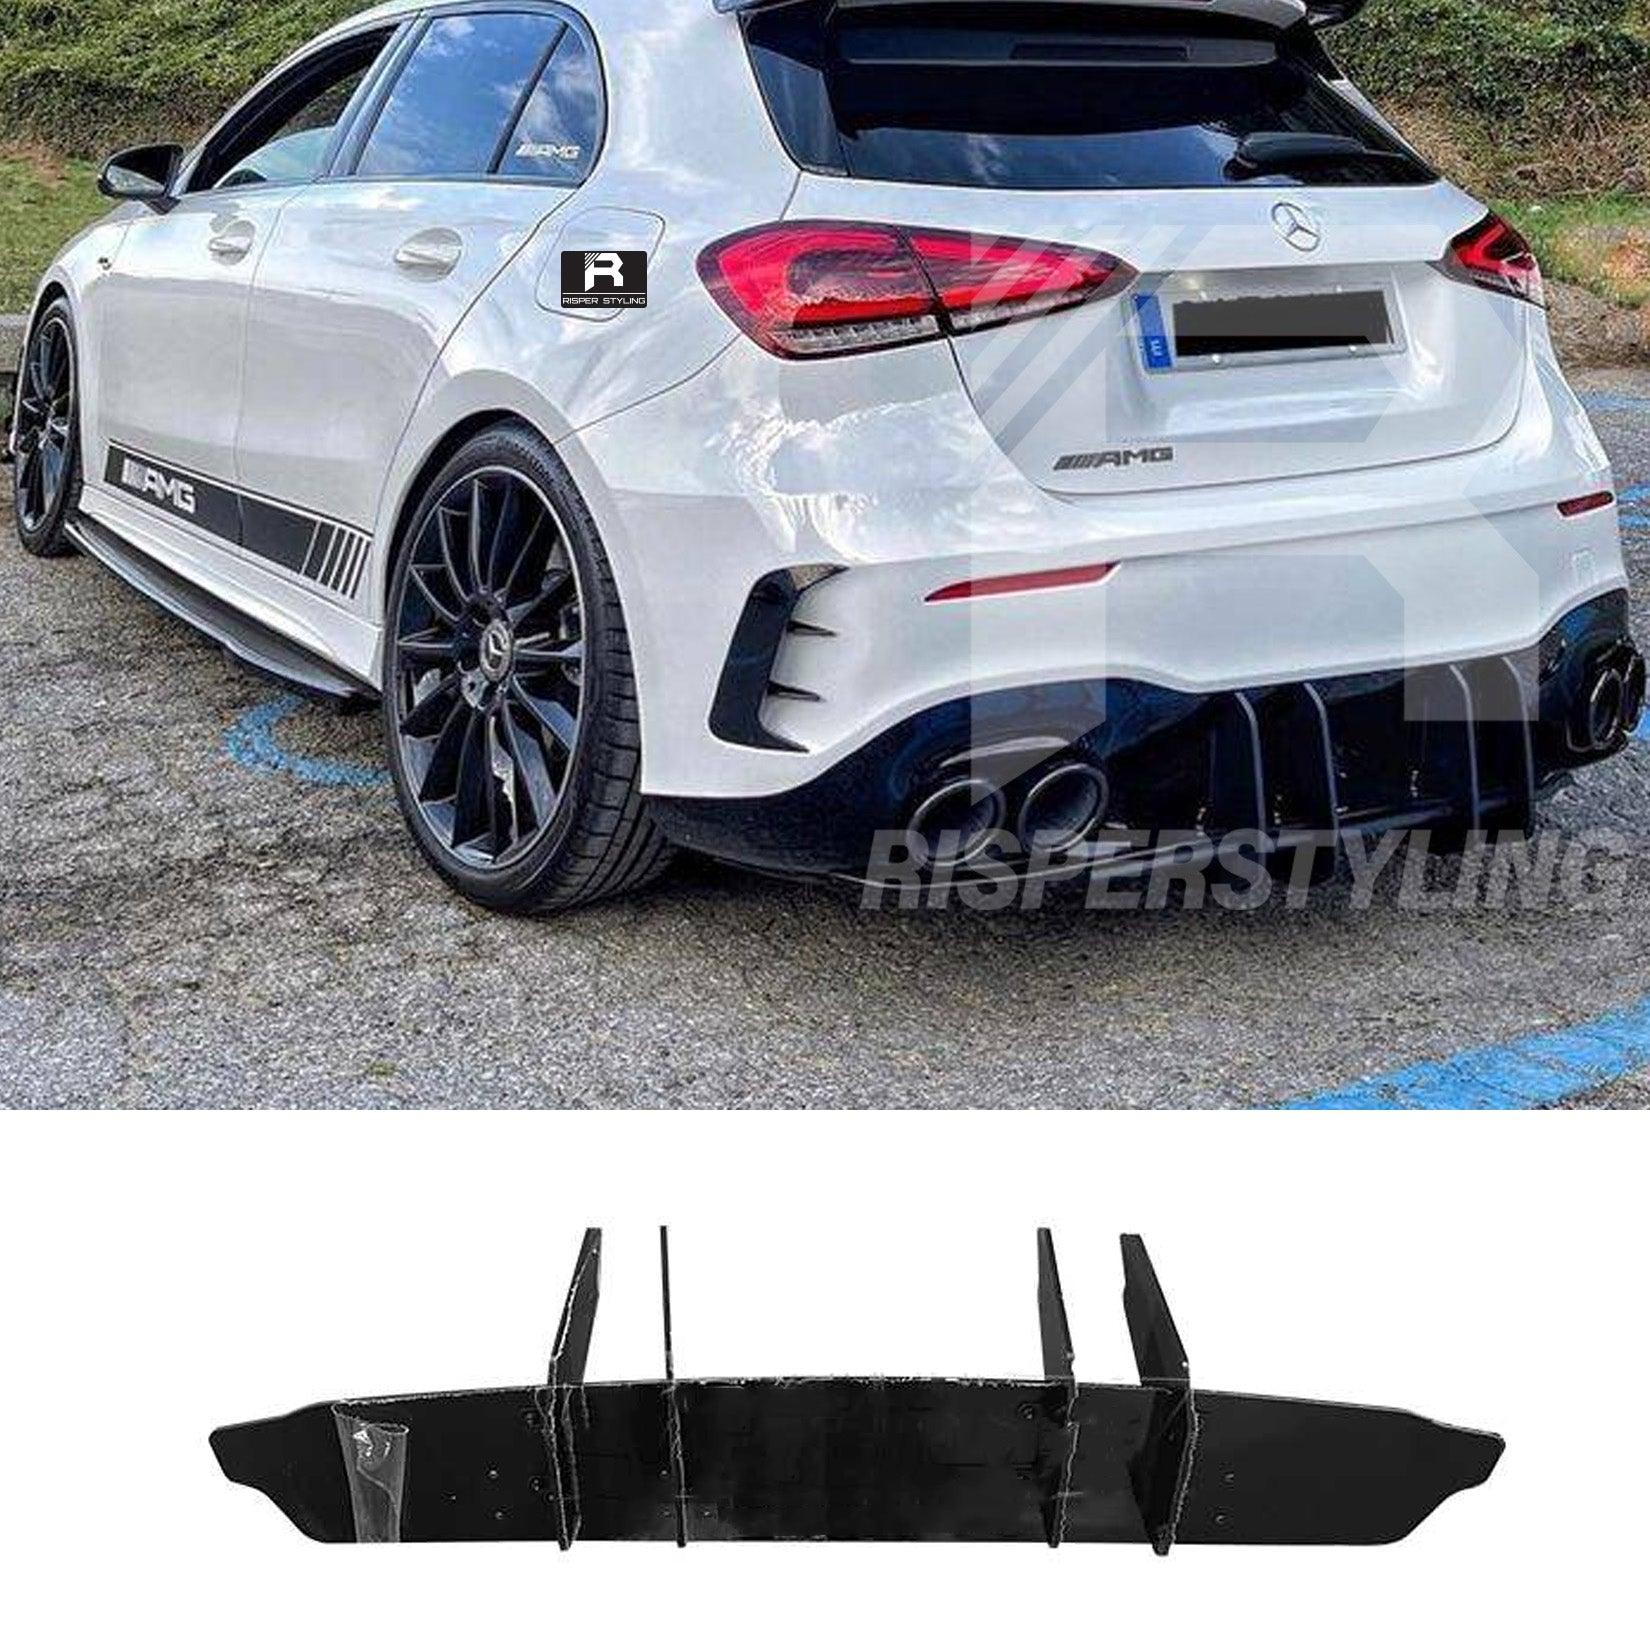 MERCEDES A CLASS AMG 2019+ W177 - REAR BLADE STYLE DIFFUSER - GLOSS BLACK - RisperStyling